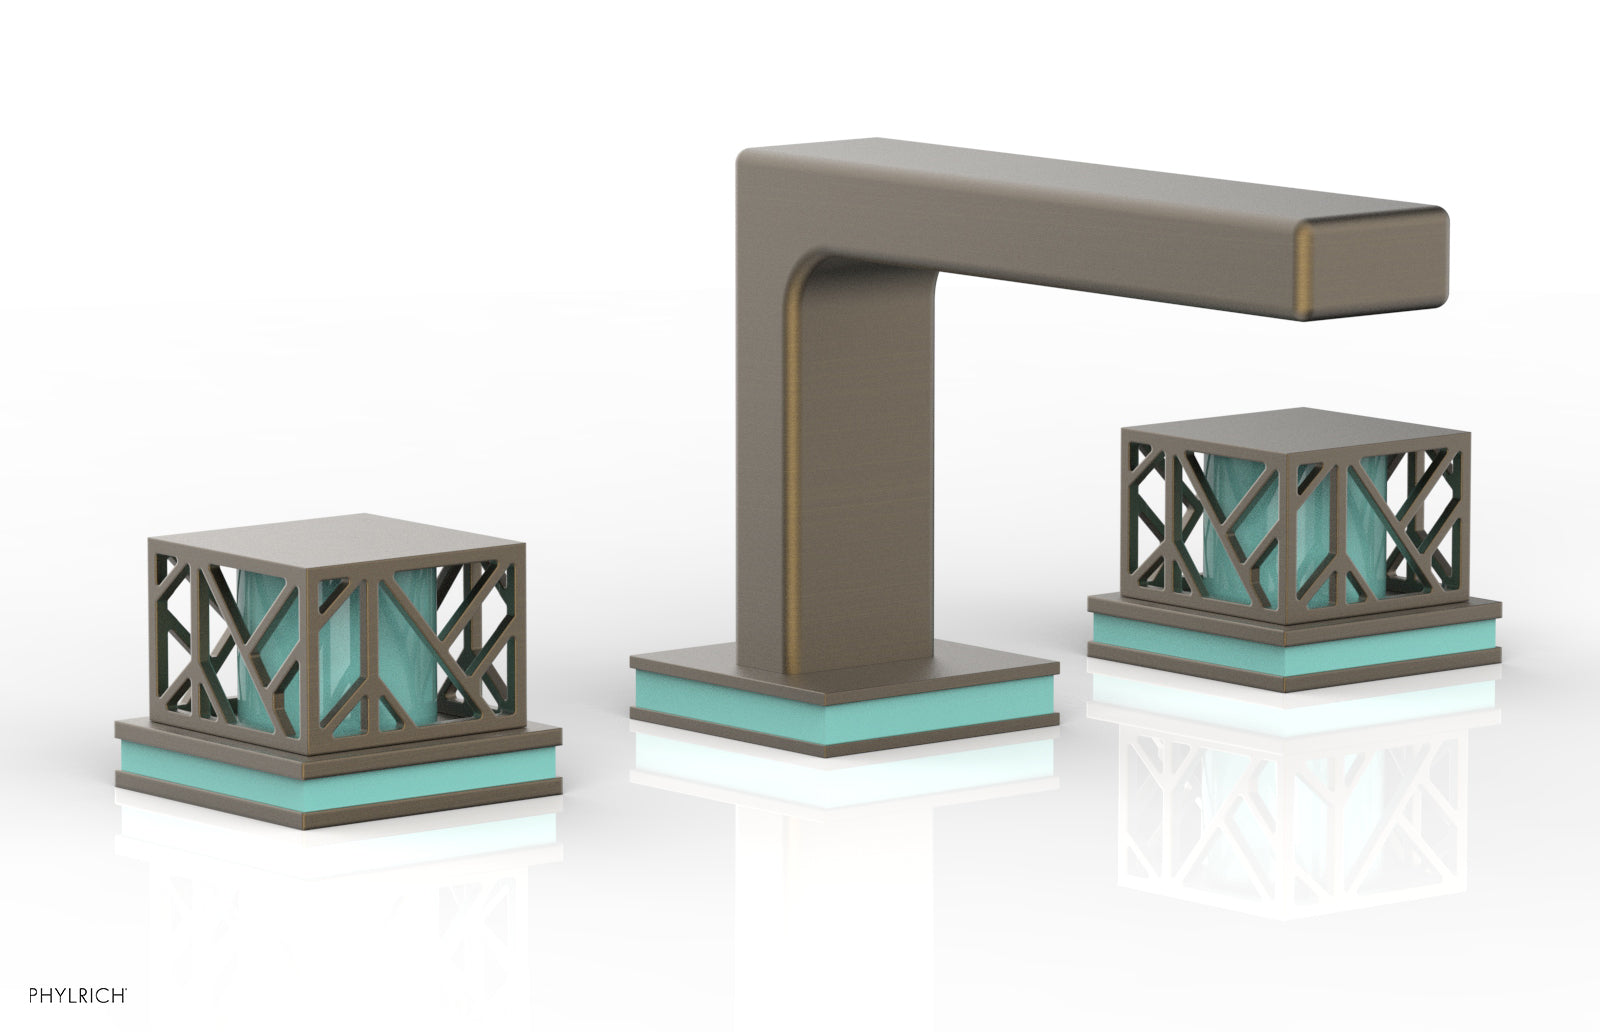 Phylrich JOLIE Widespread Faucet - Square Handles with "Turquoise" Accents